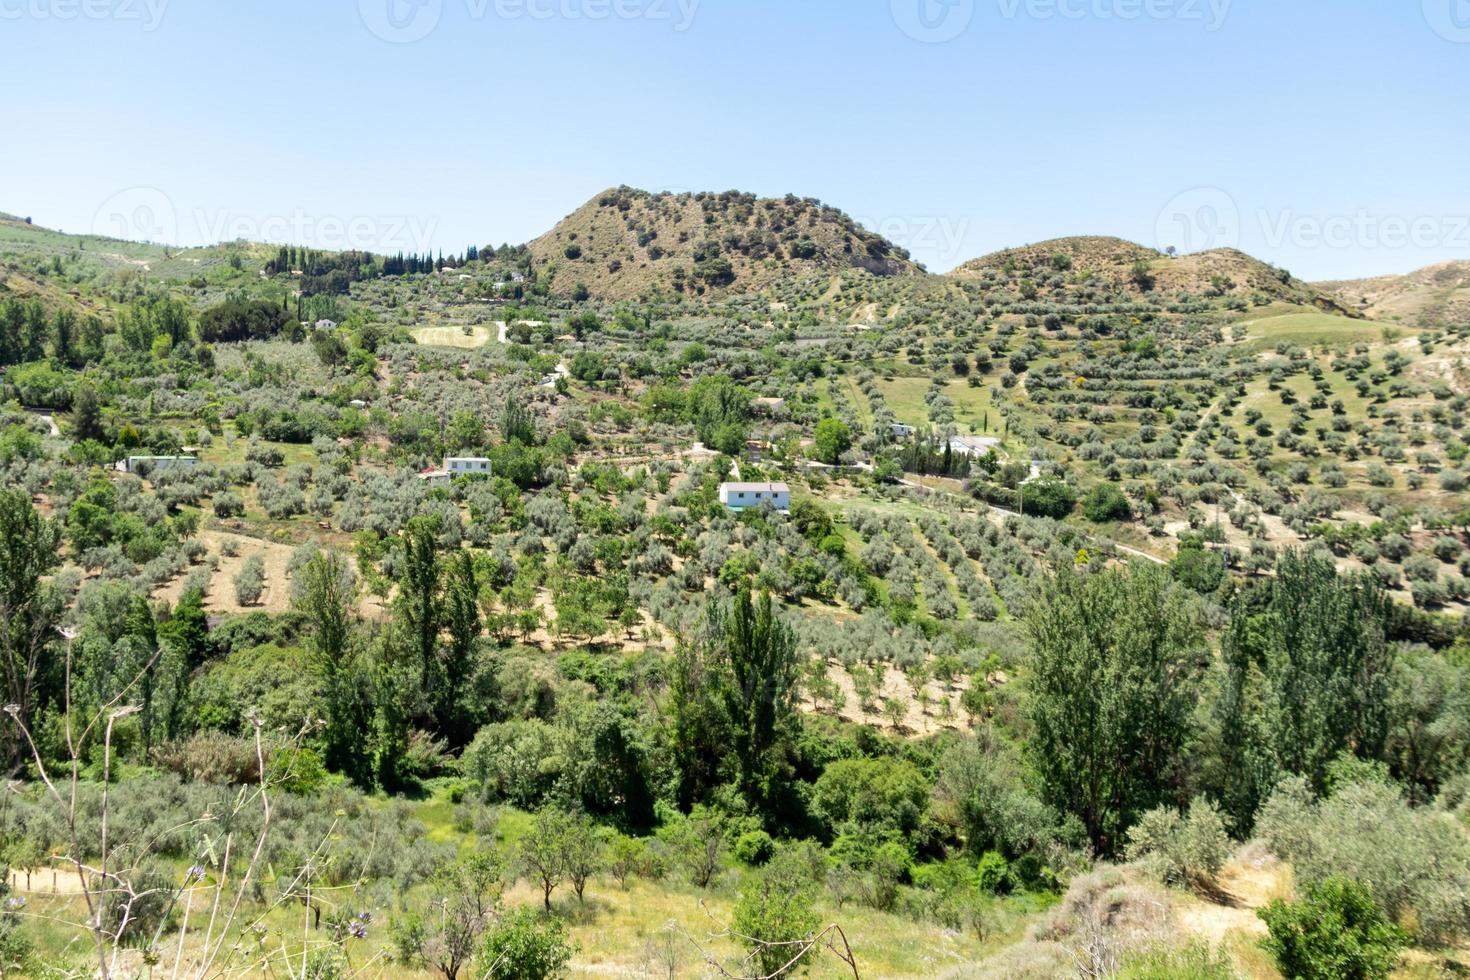 Landscapes on the route of the Cahorros, Monachil, Granada, Spain photo